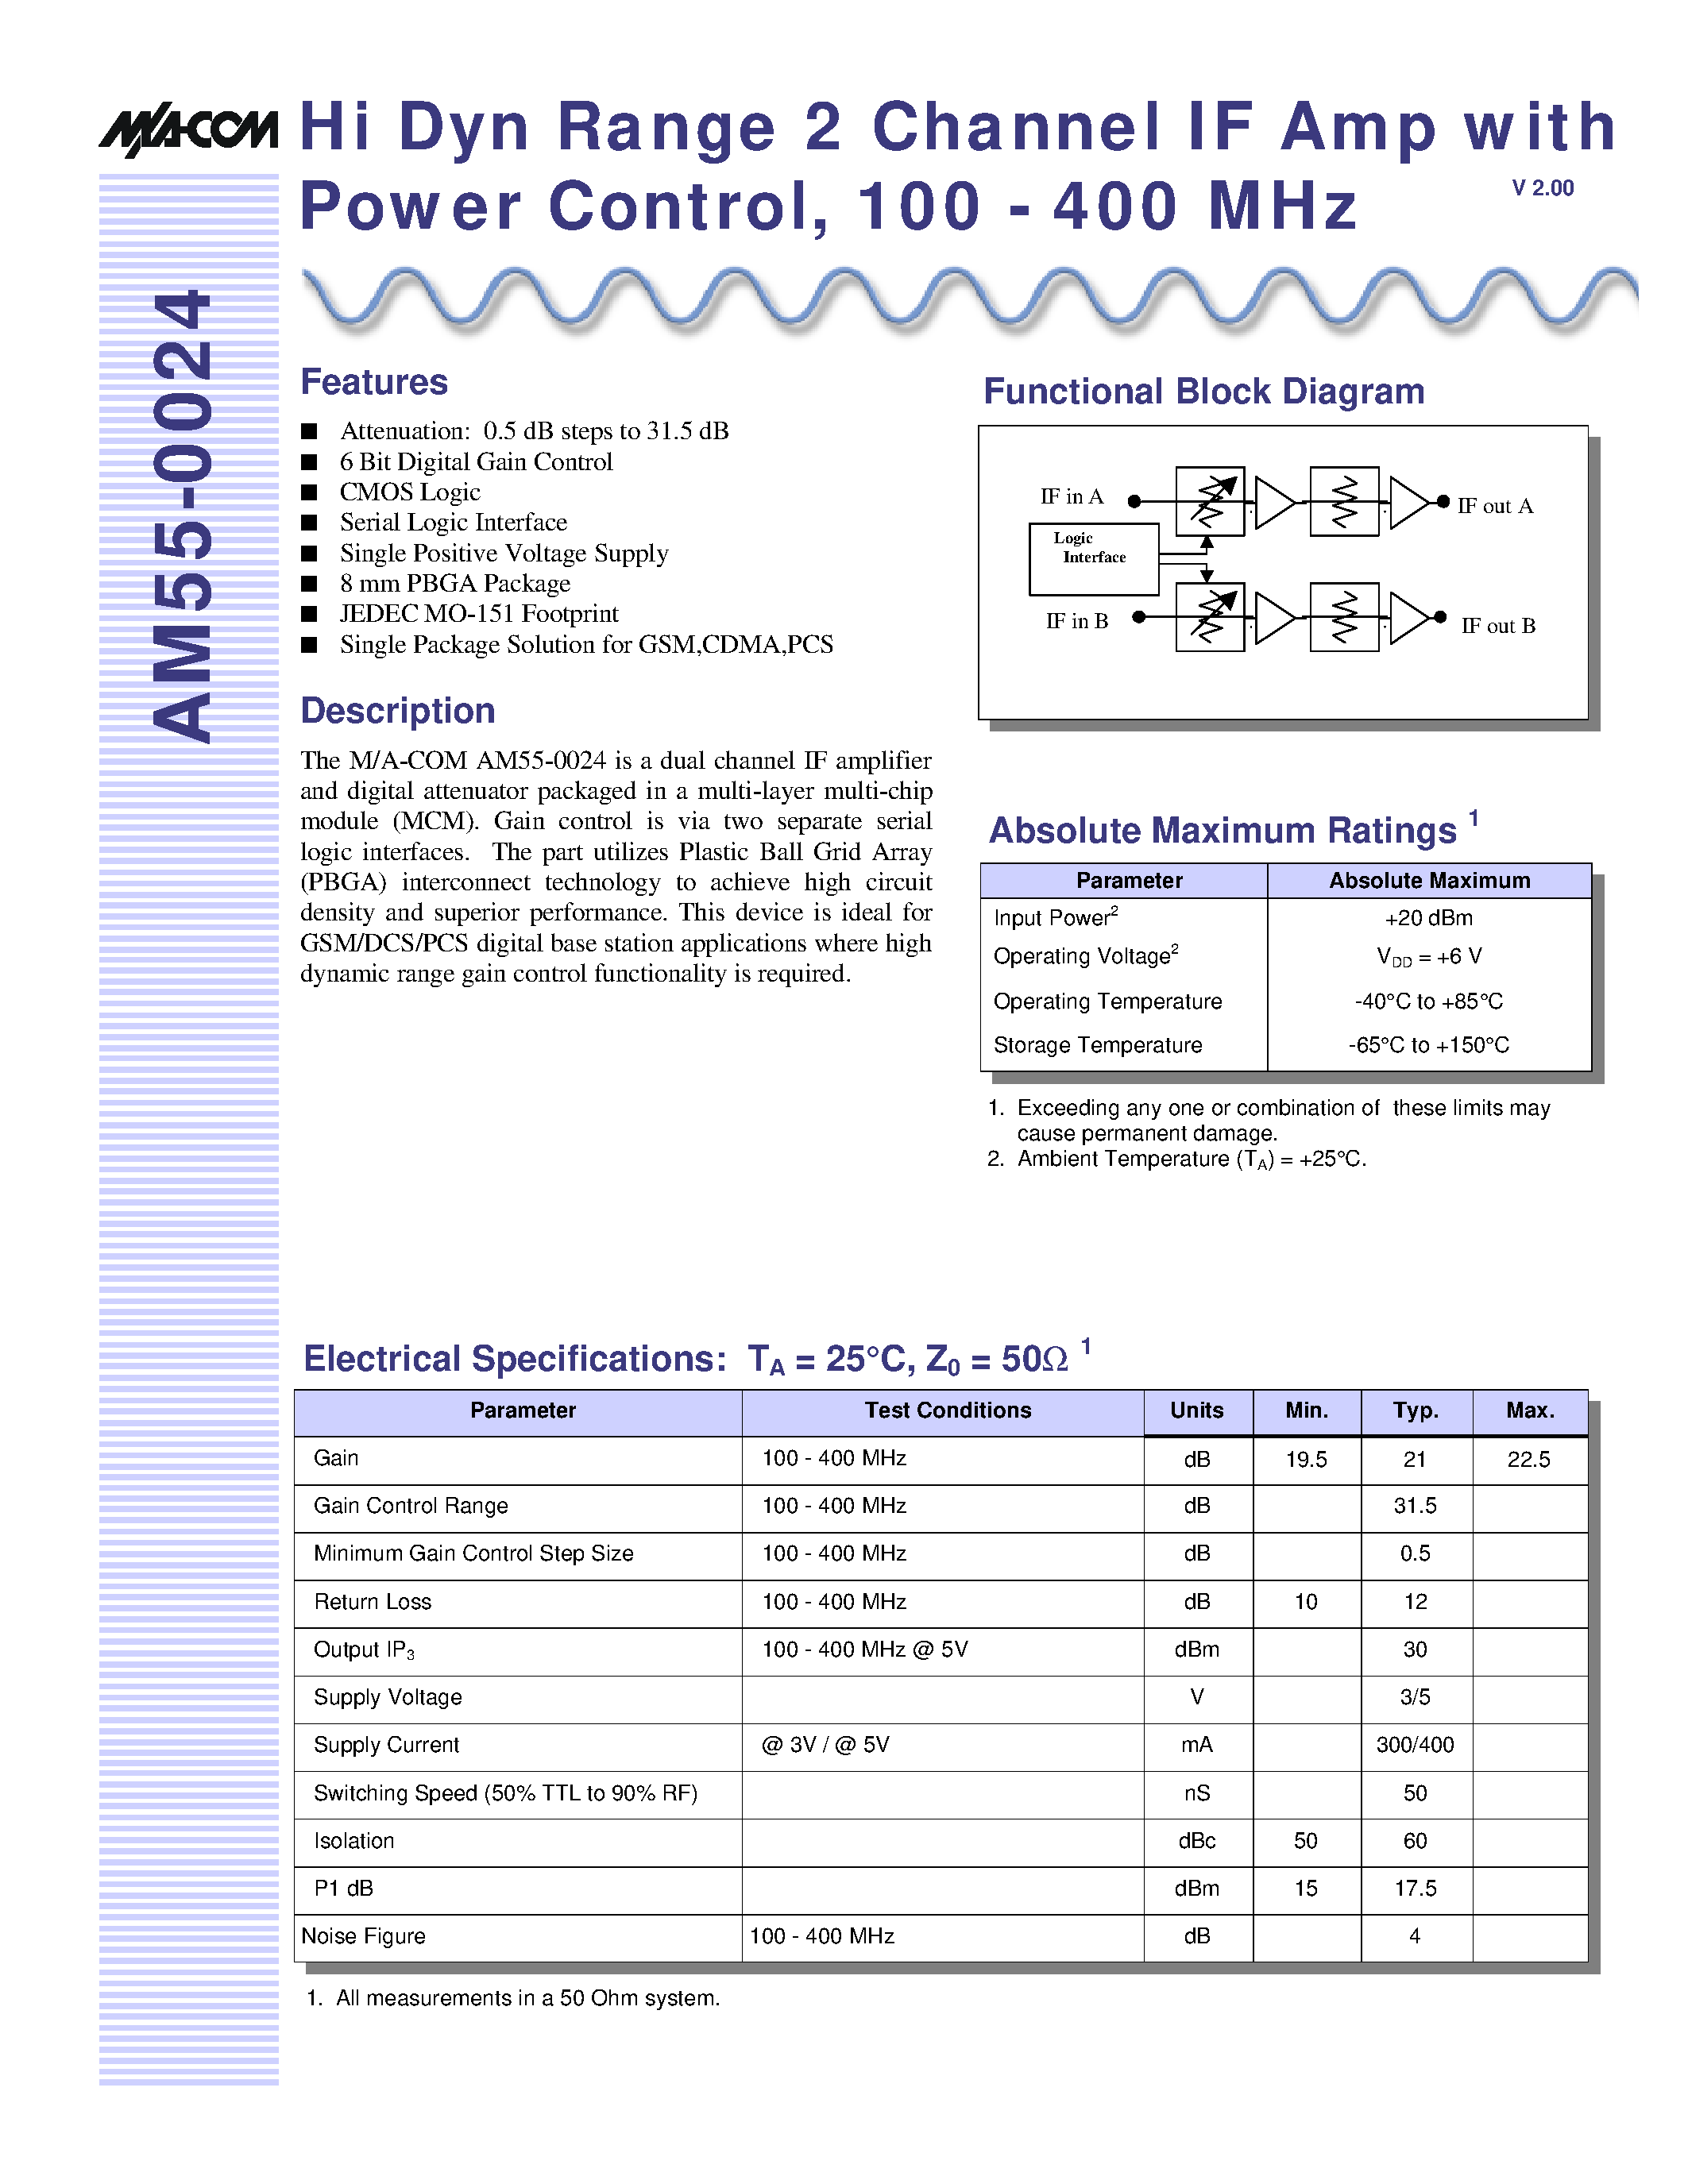 Datasheet AM55-0024 - Hi Dyn Range 2 Channel IF Amp with Power Control/ 100 - 400 MHz page 1